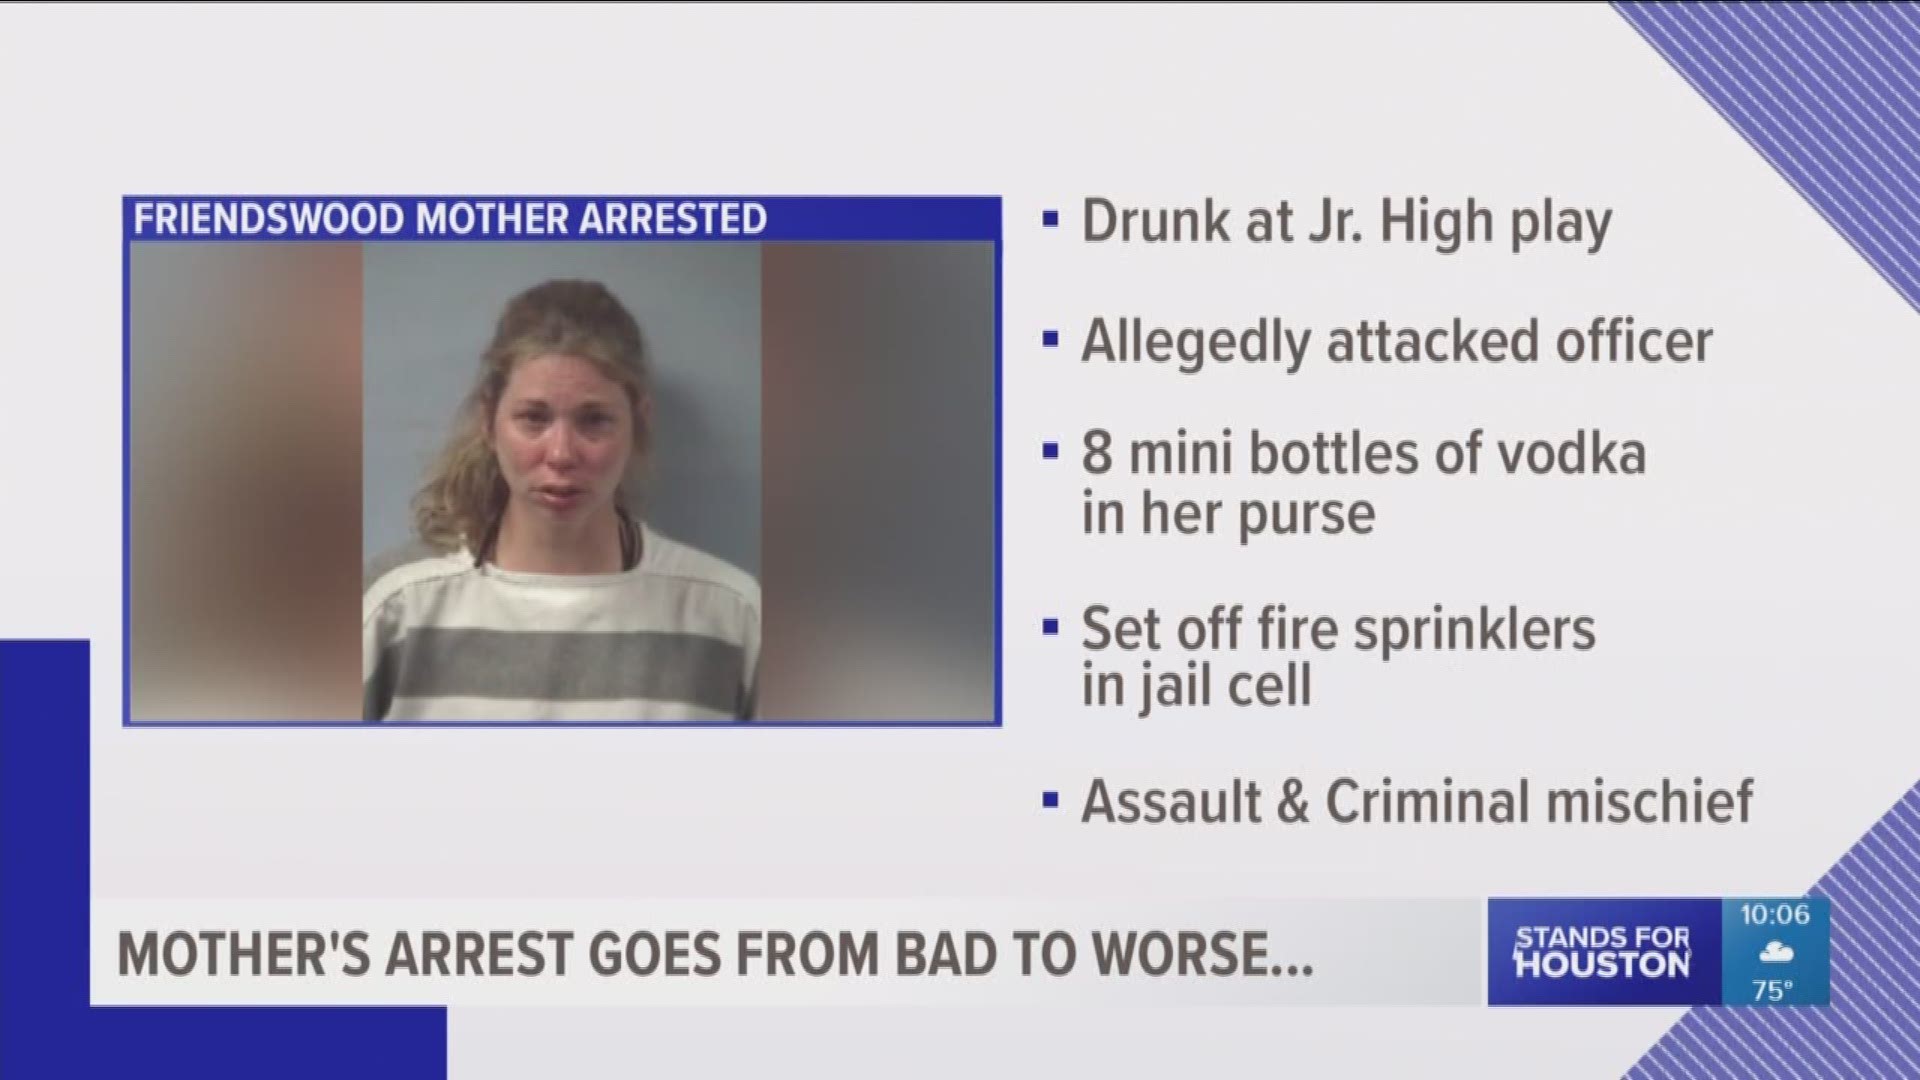 A Friendswood mother is accused of assaulting a police officer while intoxicated and later setting off the sprinkler system in her jail cell.